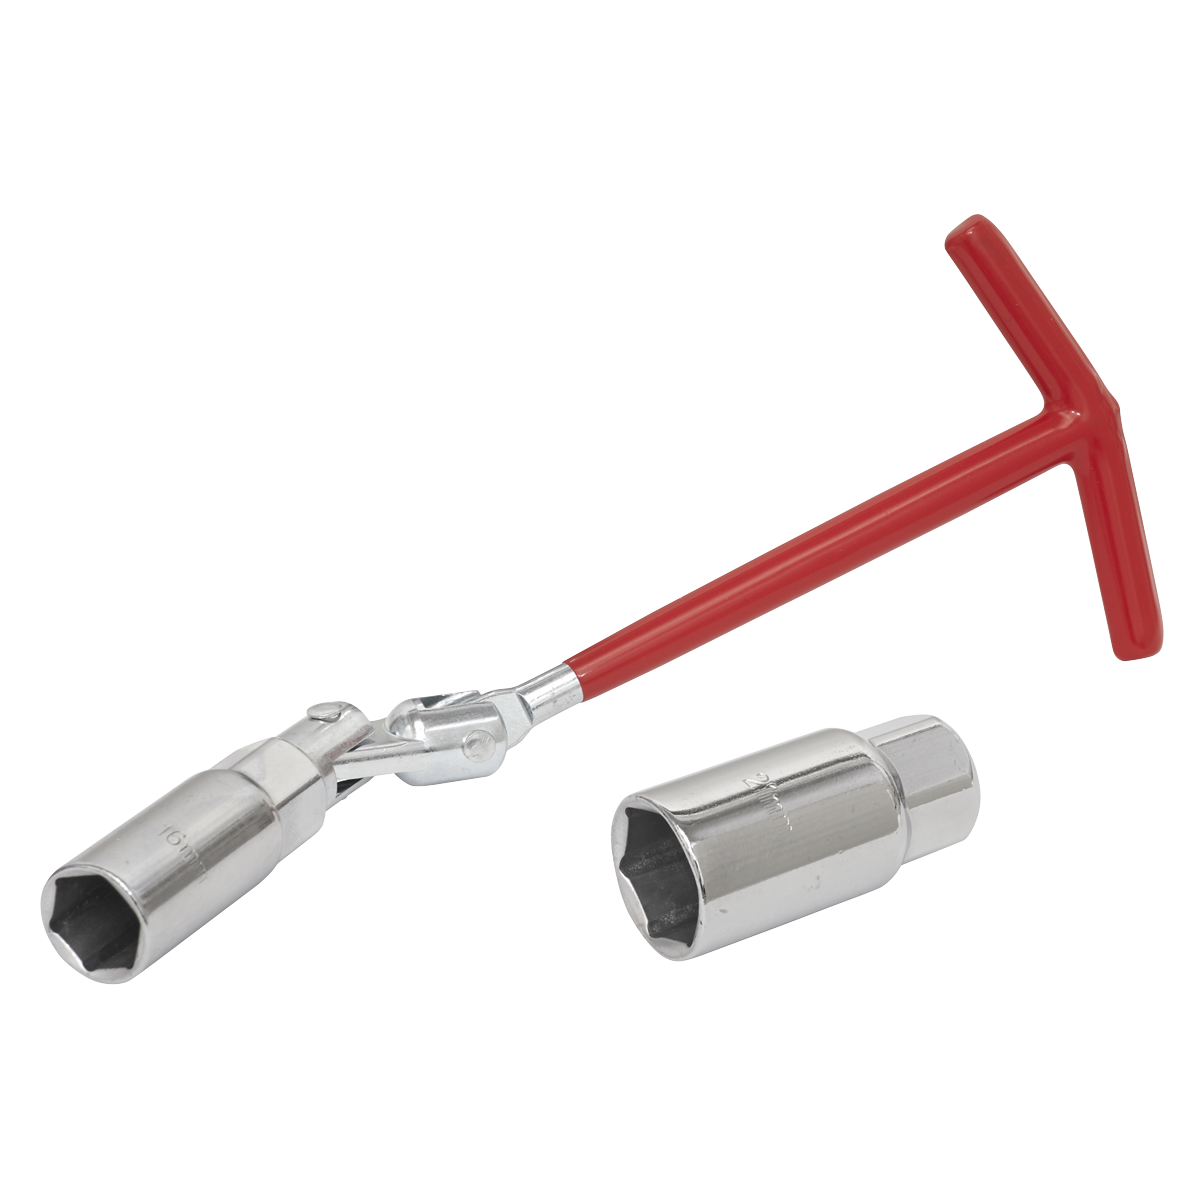 Sealey  T-Handle Bar is designed to allow maximum leverage